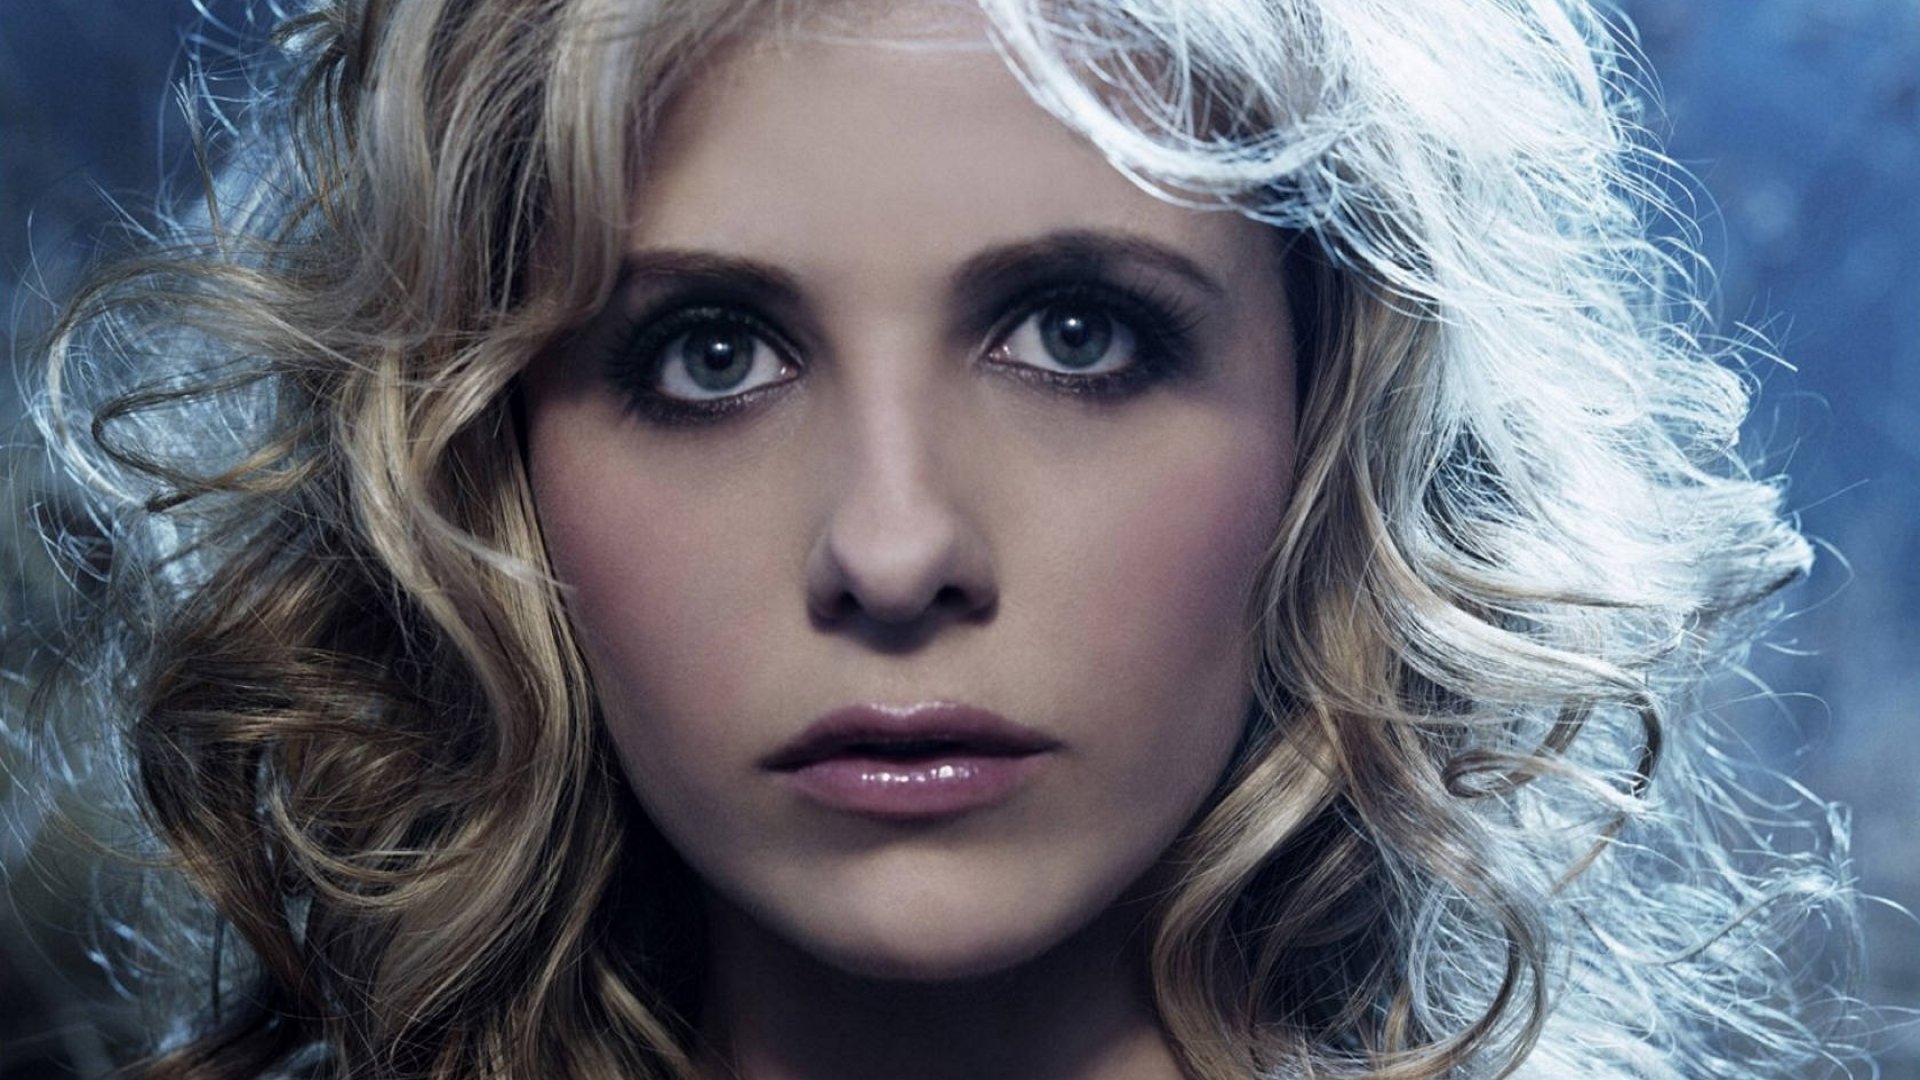 Download full hd 1920x1080 Sarah Michelle Gellar PC background ID:187847 for free